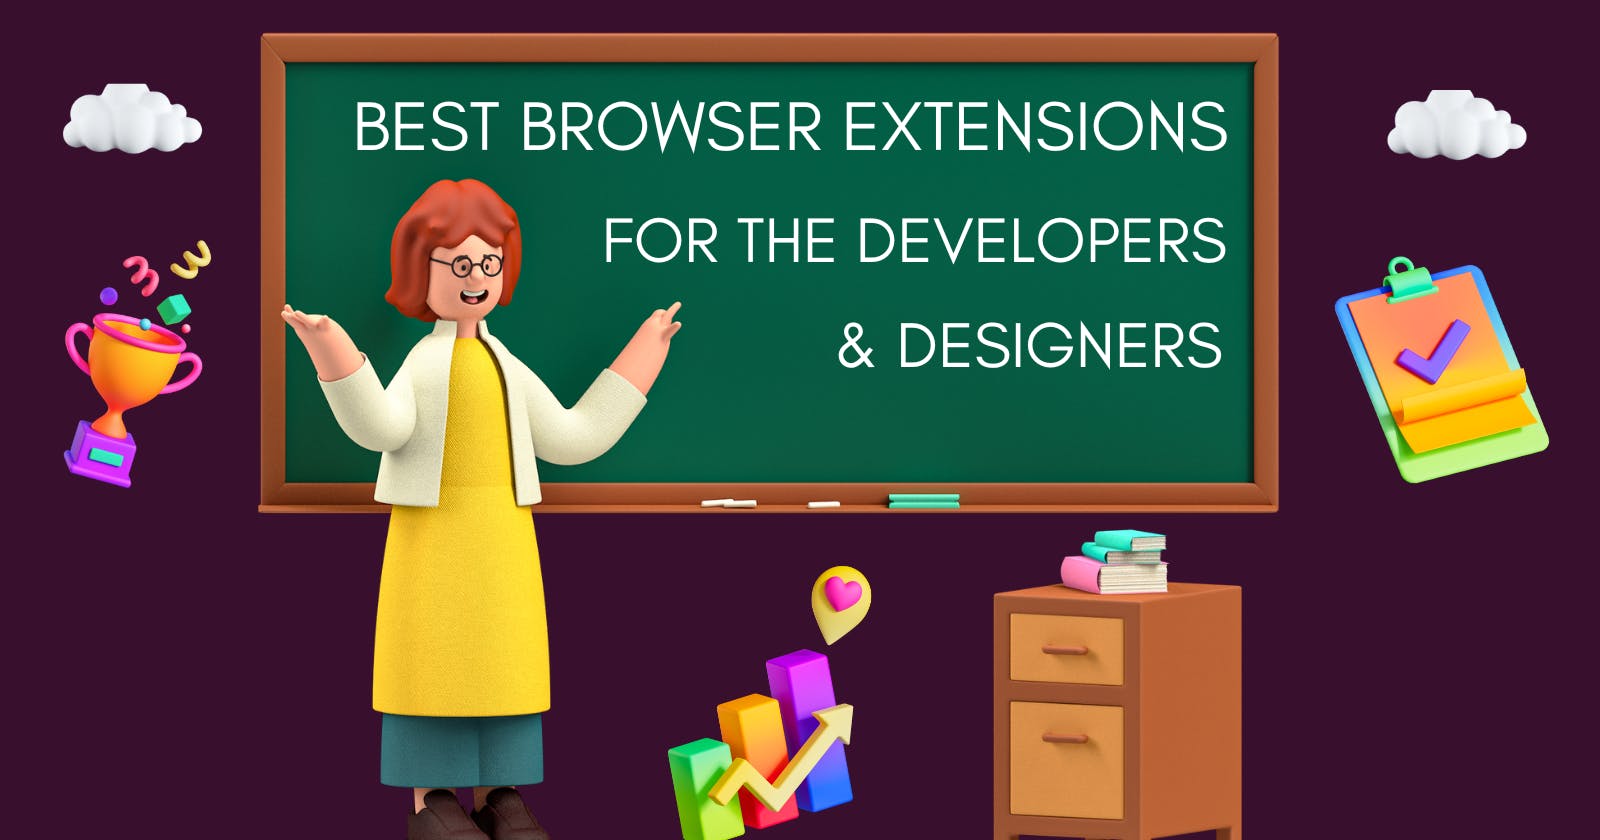 Best Browser Extensions For The Developer & Designers